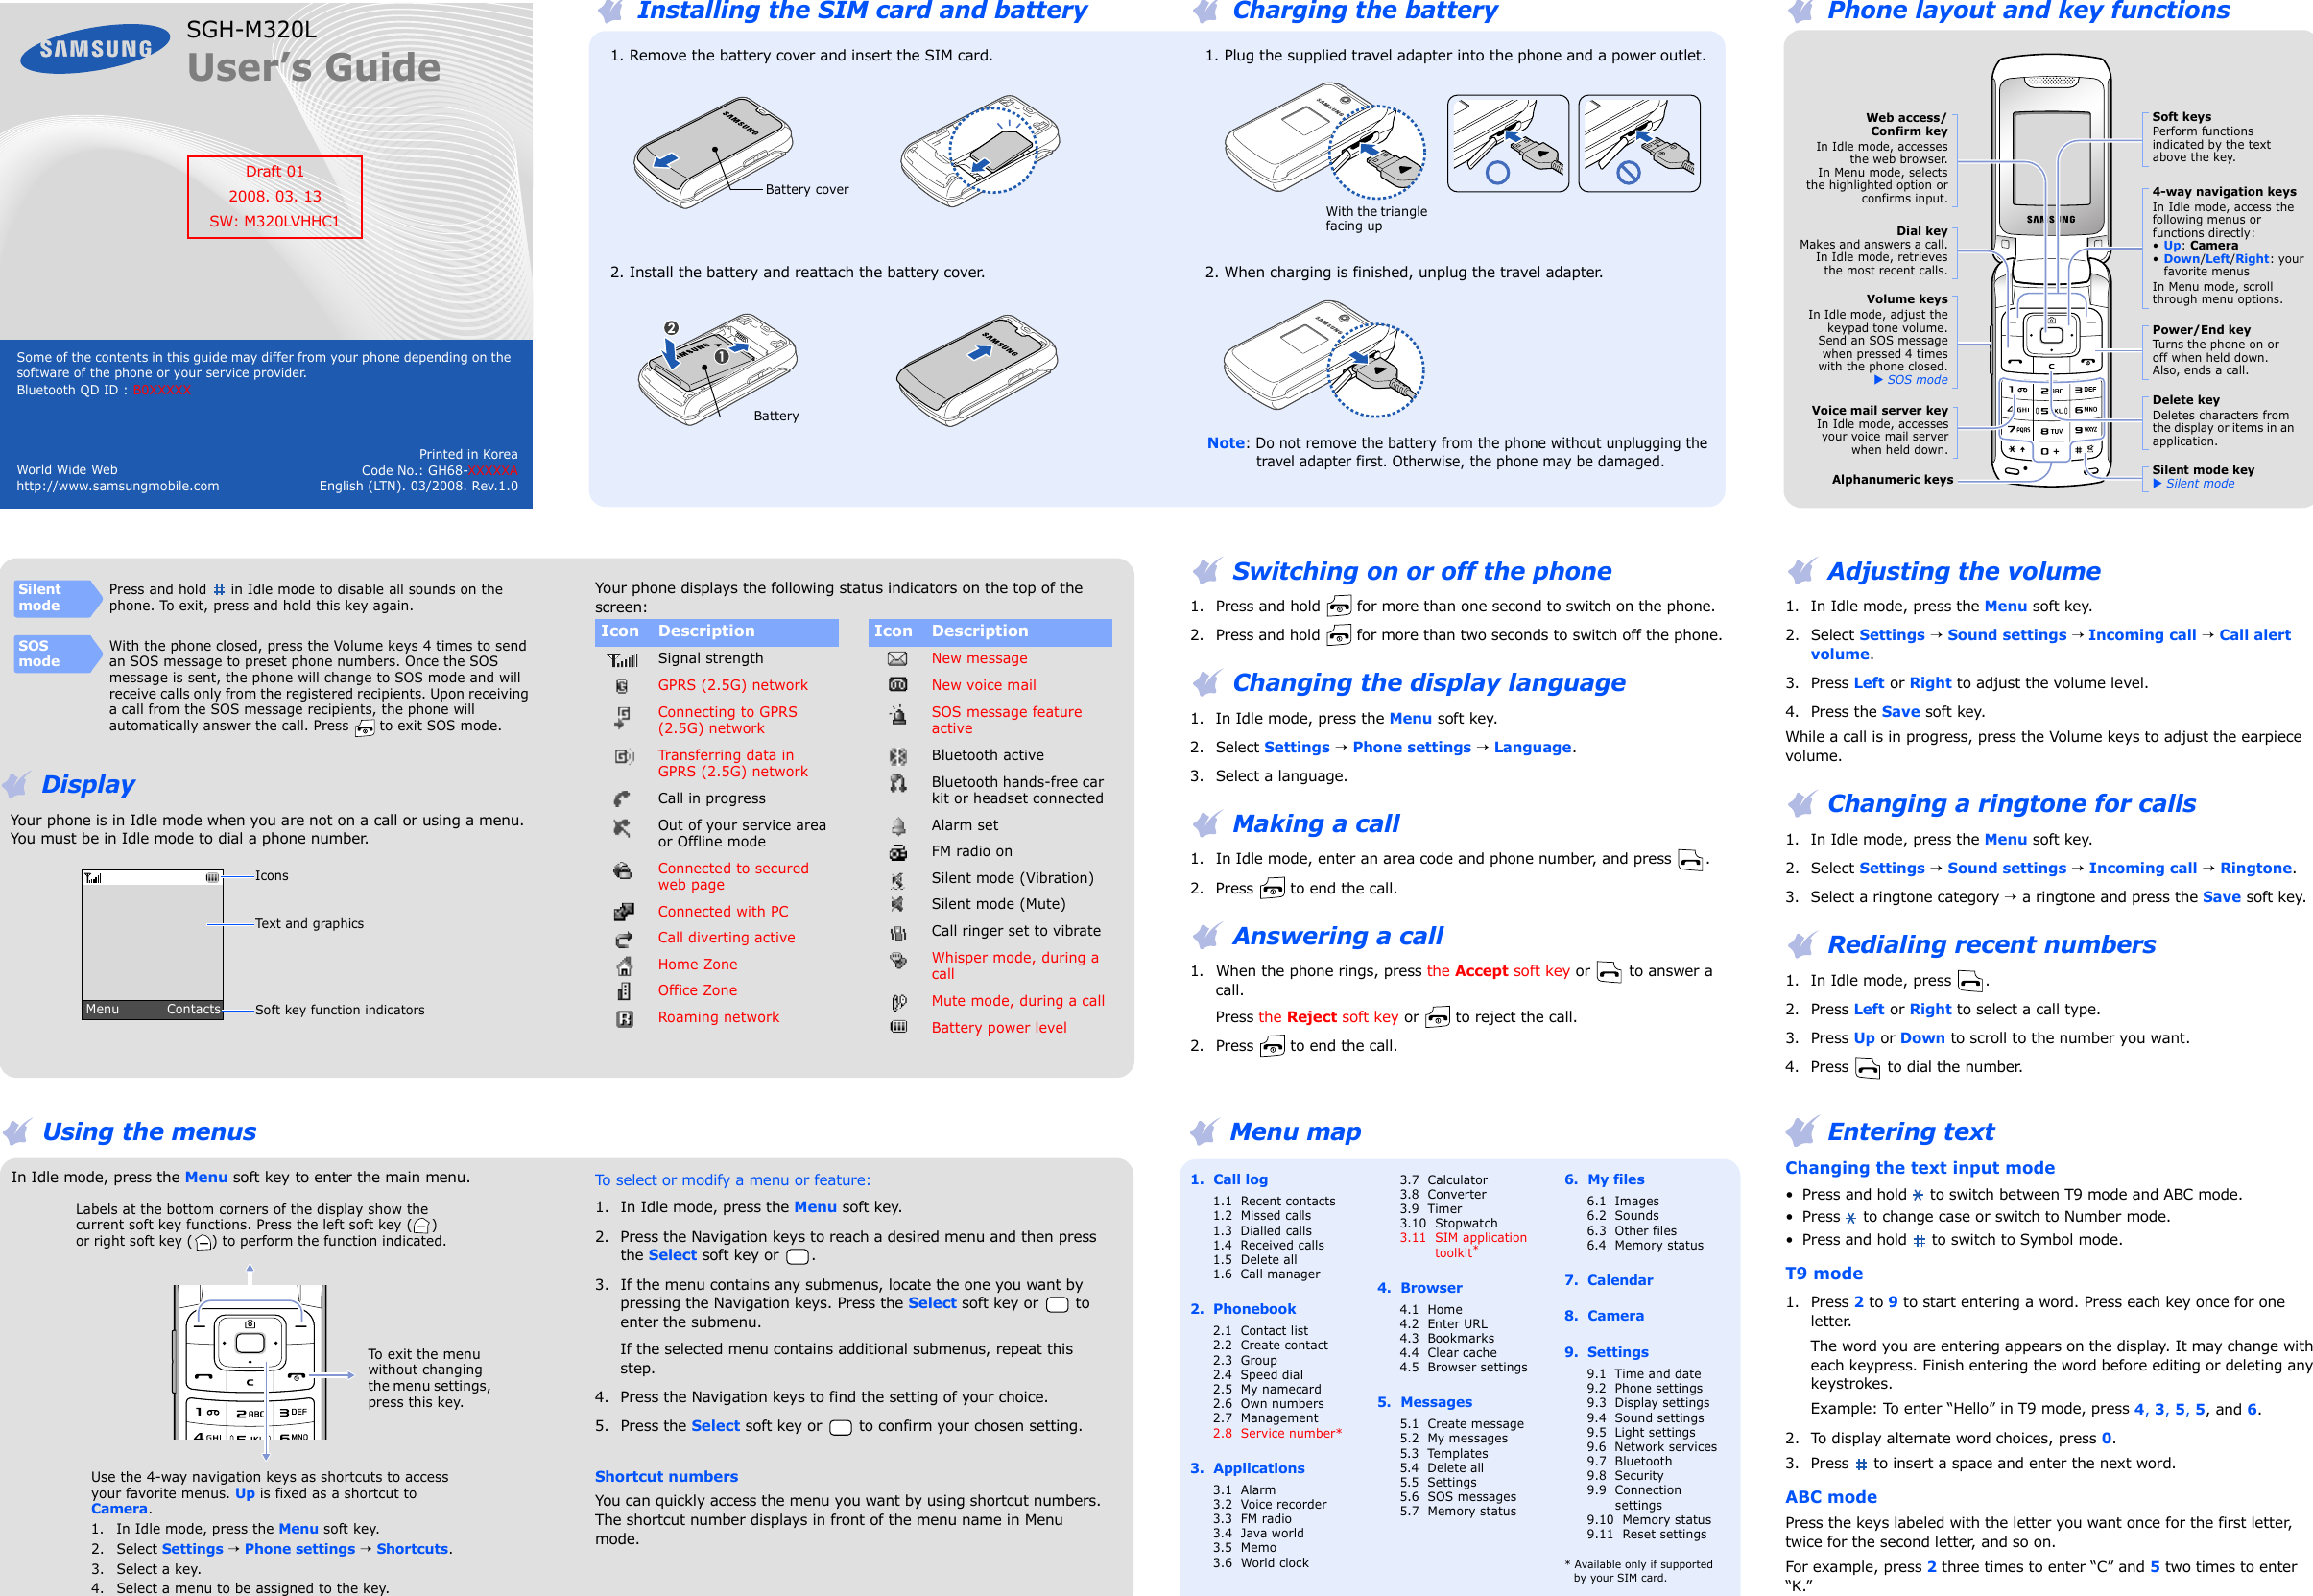 Printed in KoreaCode No.: GH68-XXXXXAEnglish (LTN). 03/2008. Rev.1.0World Wide Webhttp://www.samsungmobile.comSGH-M320LUser’s GuideSome of the contents in this guide may differ from your phone depending on the software of the phone or your service provider.Bluetooth QD ID : B0XXXXXDraft 012008. 03. 13SW: M320LVHHC1 Installing the SIM card and battery   1. Remove the battery cover and insert the SIM card.   2. Install the battery and reattach the battery cover.Battery coverBattery Charging the battery   1. Plug the supplied travel adapter into the phone and a power outlet.   2. When charging is finished, unplug the travel adapter.Note: Do not remove the battery from the phone without unplugging the travel adapter first. Otherwise, the phone may be damaged.With the triangle facing up Phone layout and key functionsPower/End keyTurns the phone on or off when held down. Also, ends a call.Silent mode keyX Silent modeDelete keyDeletes characters from the display or items in an application.Dial keyMakes and answers a call.In Idle mode, retrievesthe most recent calls.Volume keysIn Idle mode, adjust thekeypad tone volume. Send an SOS messagewhen pressed 4 timeswith the phone closed.X SOS modeAlphanumeric keysWeb access/Confirm keyIn Idle mode, accessesthe web browser.In Menu mode, selectsthe highlighted option orconfirms input.Voice mail server keyIn Idle mode, accessesyour voice mail serverwhen held down.4-way navigation keysIn Idle mode, access the following menus or functions directly:•Up: Camera•Down/Left/Right: your favorite menusIn Menu mode, scroll through menu options.Soft keysPerform functions indicated by the text above the key. DisplayYour phone is in Idle mode when you are not on a call or using a menu. You must be in Idle mode to dial a phone number.SilentmodePress and hold   in Idle mode to disable all sounds on the phone. To exit, press and hold this key again.SOS modeWith the phone closed, press the Volume keys 4 times to send an SOS message to preset phone numbers. Once the SOS message is sent, the phone will change to SOS mode and will receive calls only from the registered recipients. Upon receiving a call from the SOS message recipients, the phone will automatically answer the call. Press   to exit SOS mode.Menu           ContactsText and graphicsSoft key function indicatorsIconsYour phone displays the following status indicators on the top of the screen: Switching on or off the phone1. Press and hold   for more than one second to switch on the phone.2. Press and hold   for more than two seconds to switch off the phone. Changing the display language1. In Idle mode, press the Menu soft key.2. Select Settings → Phone settings → Language.3. Select a language. Making a call1. In Idle mode, enter an area code and phone number, and press  . 2. Press   to end the call. Answering a call1. When the phone rings, press the Accept soft key or   to answer a call.Press the Reject soft key or   to reject the call.2. Press   to end the call. Adjusting the volume1. In Idle mode, press the Menu soft key.2. Select Settings → Sound settings → Incoming call → Call alert volume.3. Press Left or Right to adjust the volume level.4. Press the Save soft key. While a call is in progress, press the Volume keys to adjust the earpiece volume. Changing a ringtone for calls1. In Idle mode, press the Menu soft key.2. Select Settings → Sound settings → Incoming call → Ringtone.3. Select a ringtone category → a ringtone and press the Save soft key. Redialing recent numbers1. In Idle mode, press  .2. Press Left or Right to select a call type.3. Press Up or Down to scroll to the number you want.4. Press   to dial the number. Using the menusIn Idle mode, press the Menu soft key to enter the main menu.To exit the menu without changing the menu settings, press this key.Labels at the bottom corners of the display show the current soft key functions. Press the left soft key ( ) or right soft key ( ) to perform the function indicated.Use the 4-way navigation keys as shortcuts to access your favorite menus. Up is fixed as a shortcut to Camera.1. In Idle mode, press the Menu soft key.2. Select Settings → Phone settings → Shortcuts.3. Select a key.4. Select a menu to be assigned to the key.To select or modify a menu or feature:1. In Idle mode, press the Menu soft key.2. Press the Navigation keys to reach a desired menu and then press the Select soft key or  .3. If the menu contains any submenus, locate the one you want by pressing the Navigation keys. Press the Select soft key or   to enter the submenu.If the selected menu contains additional submenus, repeat this step.4. Press the Navigation keys to find the setting of your choice.5. Press the Select soft key or   to confirm your chosen setting.Shortcut numbersYou can quickly access the menu you want by using shortcut numbers. The shortcut number displays in front of the menu name in Menu mode. Menu map1.  Call log1.1  Recent contacts1.2  Missed calls1.3  Dialled calls1.4  Received calls1.5  Delete all1.6  Call manager2.  Phonebook2.1  Contact list2.2  Create contact2.3  Group2.4  Speed dial2.5  My namecard2.6  Own numbers2.7  Management2.8  Service number*3.  Applications3.1  Alarm3.2  Voice recorder3.3  FM radio3.4  Java world3.5  Memo3.6  World clock3.7  Calculator3.8  Converter3.9  Timer3.10  Stopwatch3.11  SIM application toolkit*4.  Browser4.1  Home4.2  Enter URL4.3  Bookmarks4.4  Clear cache4.5  Browser settings5.  Messages5.1  Create message5.2  My messages5.3  Templates5.4  Delete all5.5  Settings5.6  SOS messages5.7  Memory status6.  My files6.1  Images6.2  Sounds6.3  Other files6.4  Memory status7.  Calendar8.  Camera9.  Settings9.1  Time and date9.2  Phone settings9.3  Display settings9.4  Sound settings9.5  Light settings9.6  Network services9.7  Bluetooth9.8  Security9.9  Connection settings9.10  Memory status9.11  Reset settings* Available only if supported by your SIM card. Entering textChanging the text input mode• Press and hold   to switch between T9 mode and ABC mode.• Press   to change case or switch to Number mode.• Press and hold   to switch to Symbol mode.T9 mode1. Press 2 to 9 to start entering a word. Press each key once for one letter. The word you are entering appears on the display. It may change with each keypress. Finish entering the word before editing or deleting any keystrokes.Example: To enter “Hello” in T9 mode, press 4, 3, 5, 5, and 6.2. To display alternate word choices, press 0.3. Press   to insert a space and enter the next word.ABC modePress the keys labeled with the letter you want once for the first letter, twice for the second letter, and so on.For example, press 2 three times to enter “C” and 5 two times to enter “K.”Icon DescriptionSignal strengthGPRS (2.5G) networkConnecting to GPRS (2.5G) networkTra ns fer ring  da ta  in GPRS (2.5G) networkCall in progressOut of your service area or Offline modeConnected to secured web pageConnected with PCCall diverting activeHome ZoneOffice ZoneRoaming networkNew messageNew voice mailSOS message feature activeBluetooth activeBluetooth hands-free car kit or headset connectedAlarm setFM radio onSilent mode (Vibration)Silent mode (Mute)Call ringer set to vibrateWhisper mode, during a callMute mode, during a callBattery power levelIcon Description